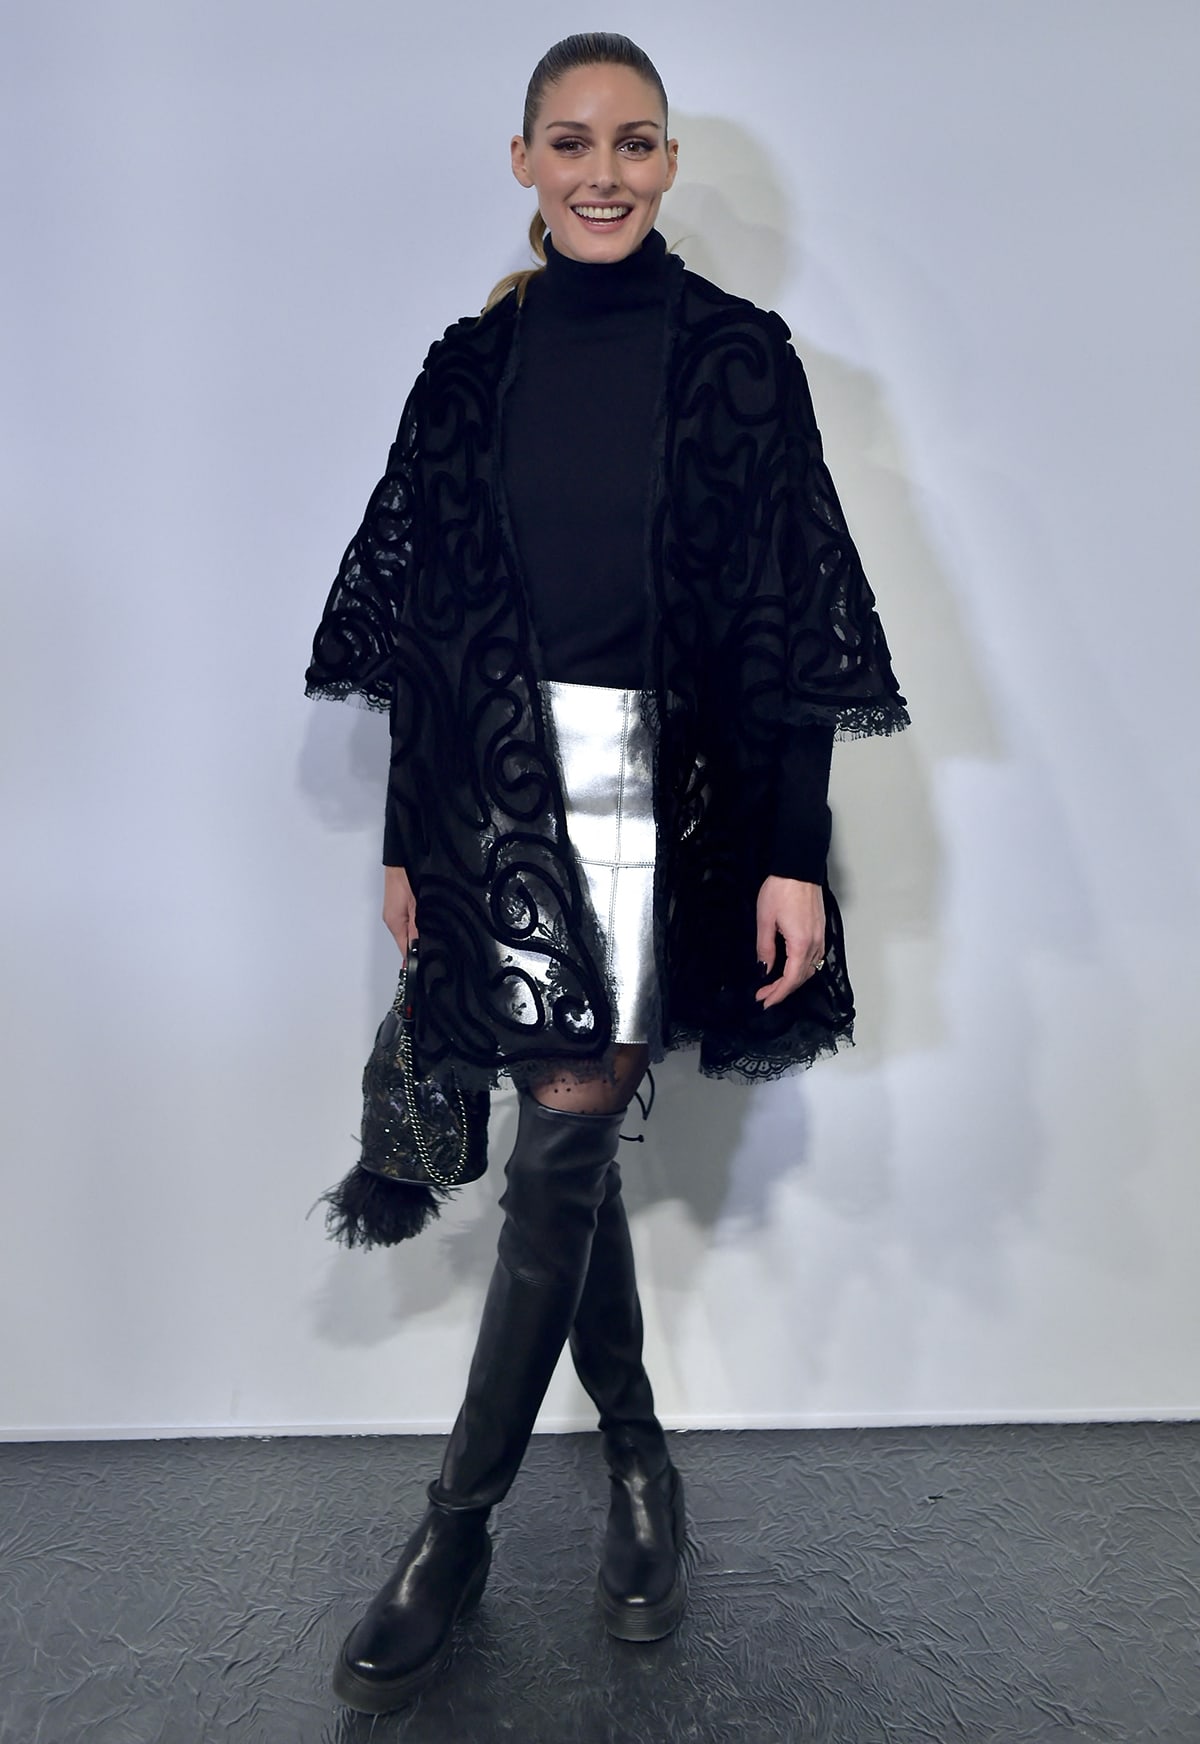 Olivia Palermo keeps a classy look in a black turtleneck sweater, a silver metallic mini skirt, and a lace jacket at Georges Chakra Paris Fashion Week show on January 24, 2023